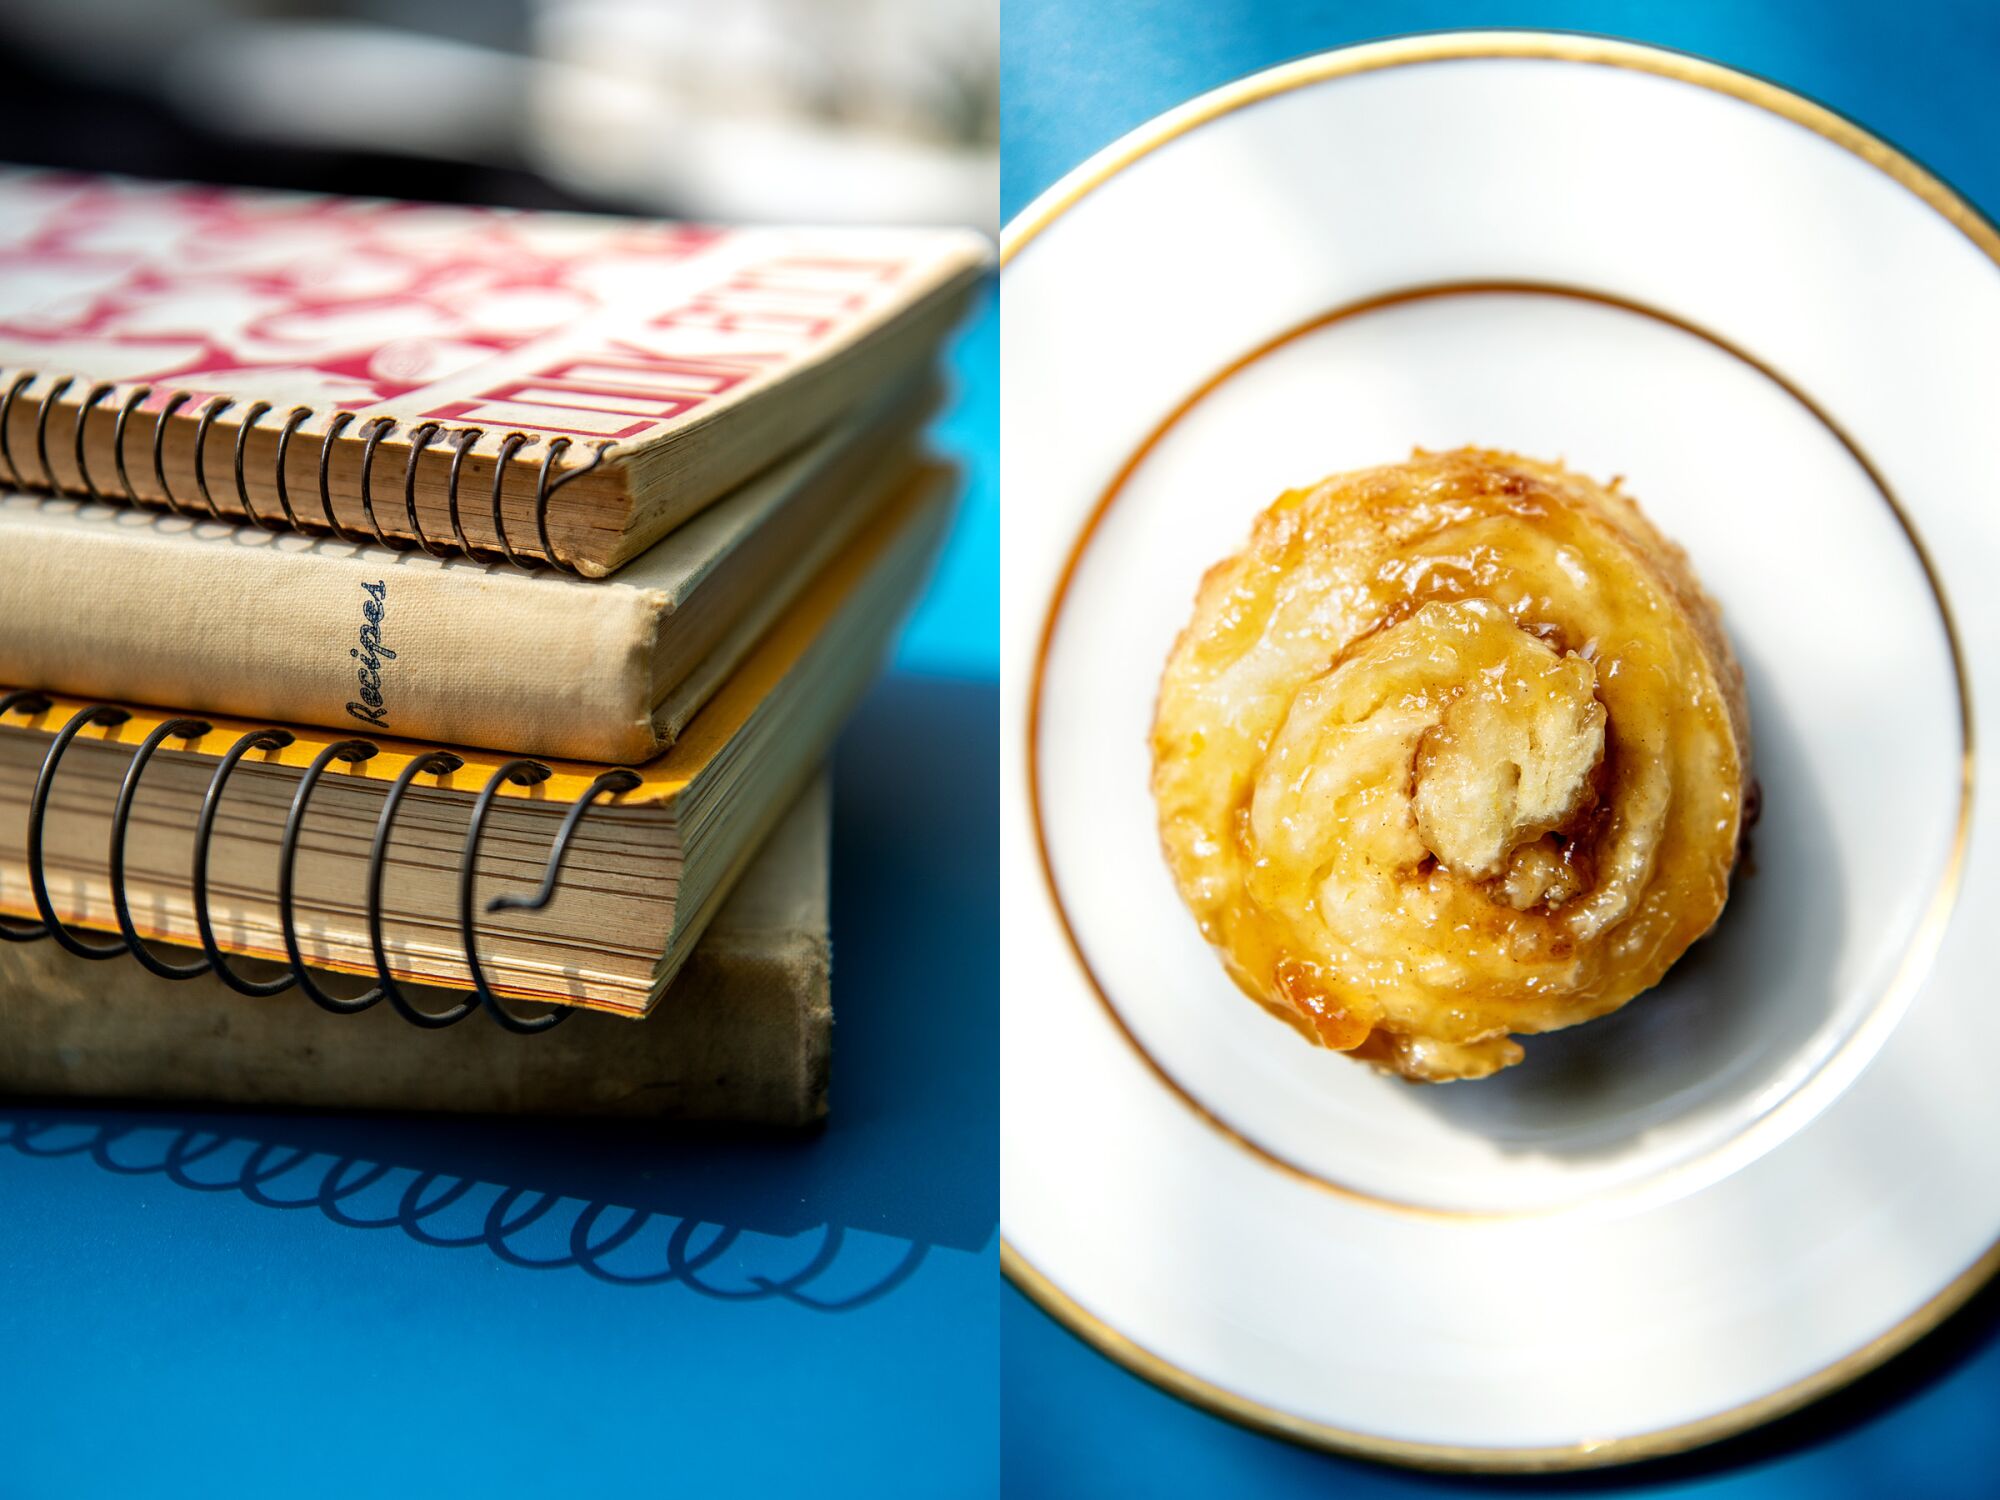 Two side-by-side images of a stack of cookbooks on the left and an orange cookie on a plate on the right.